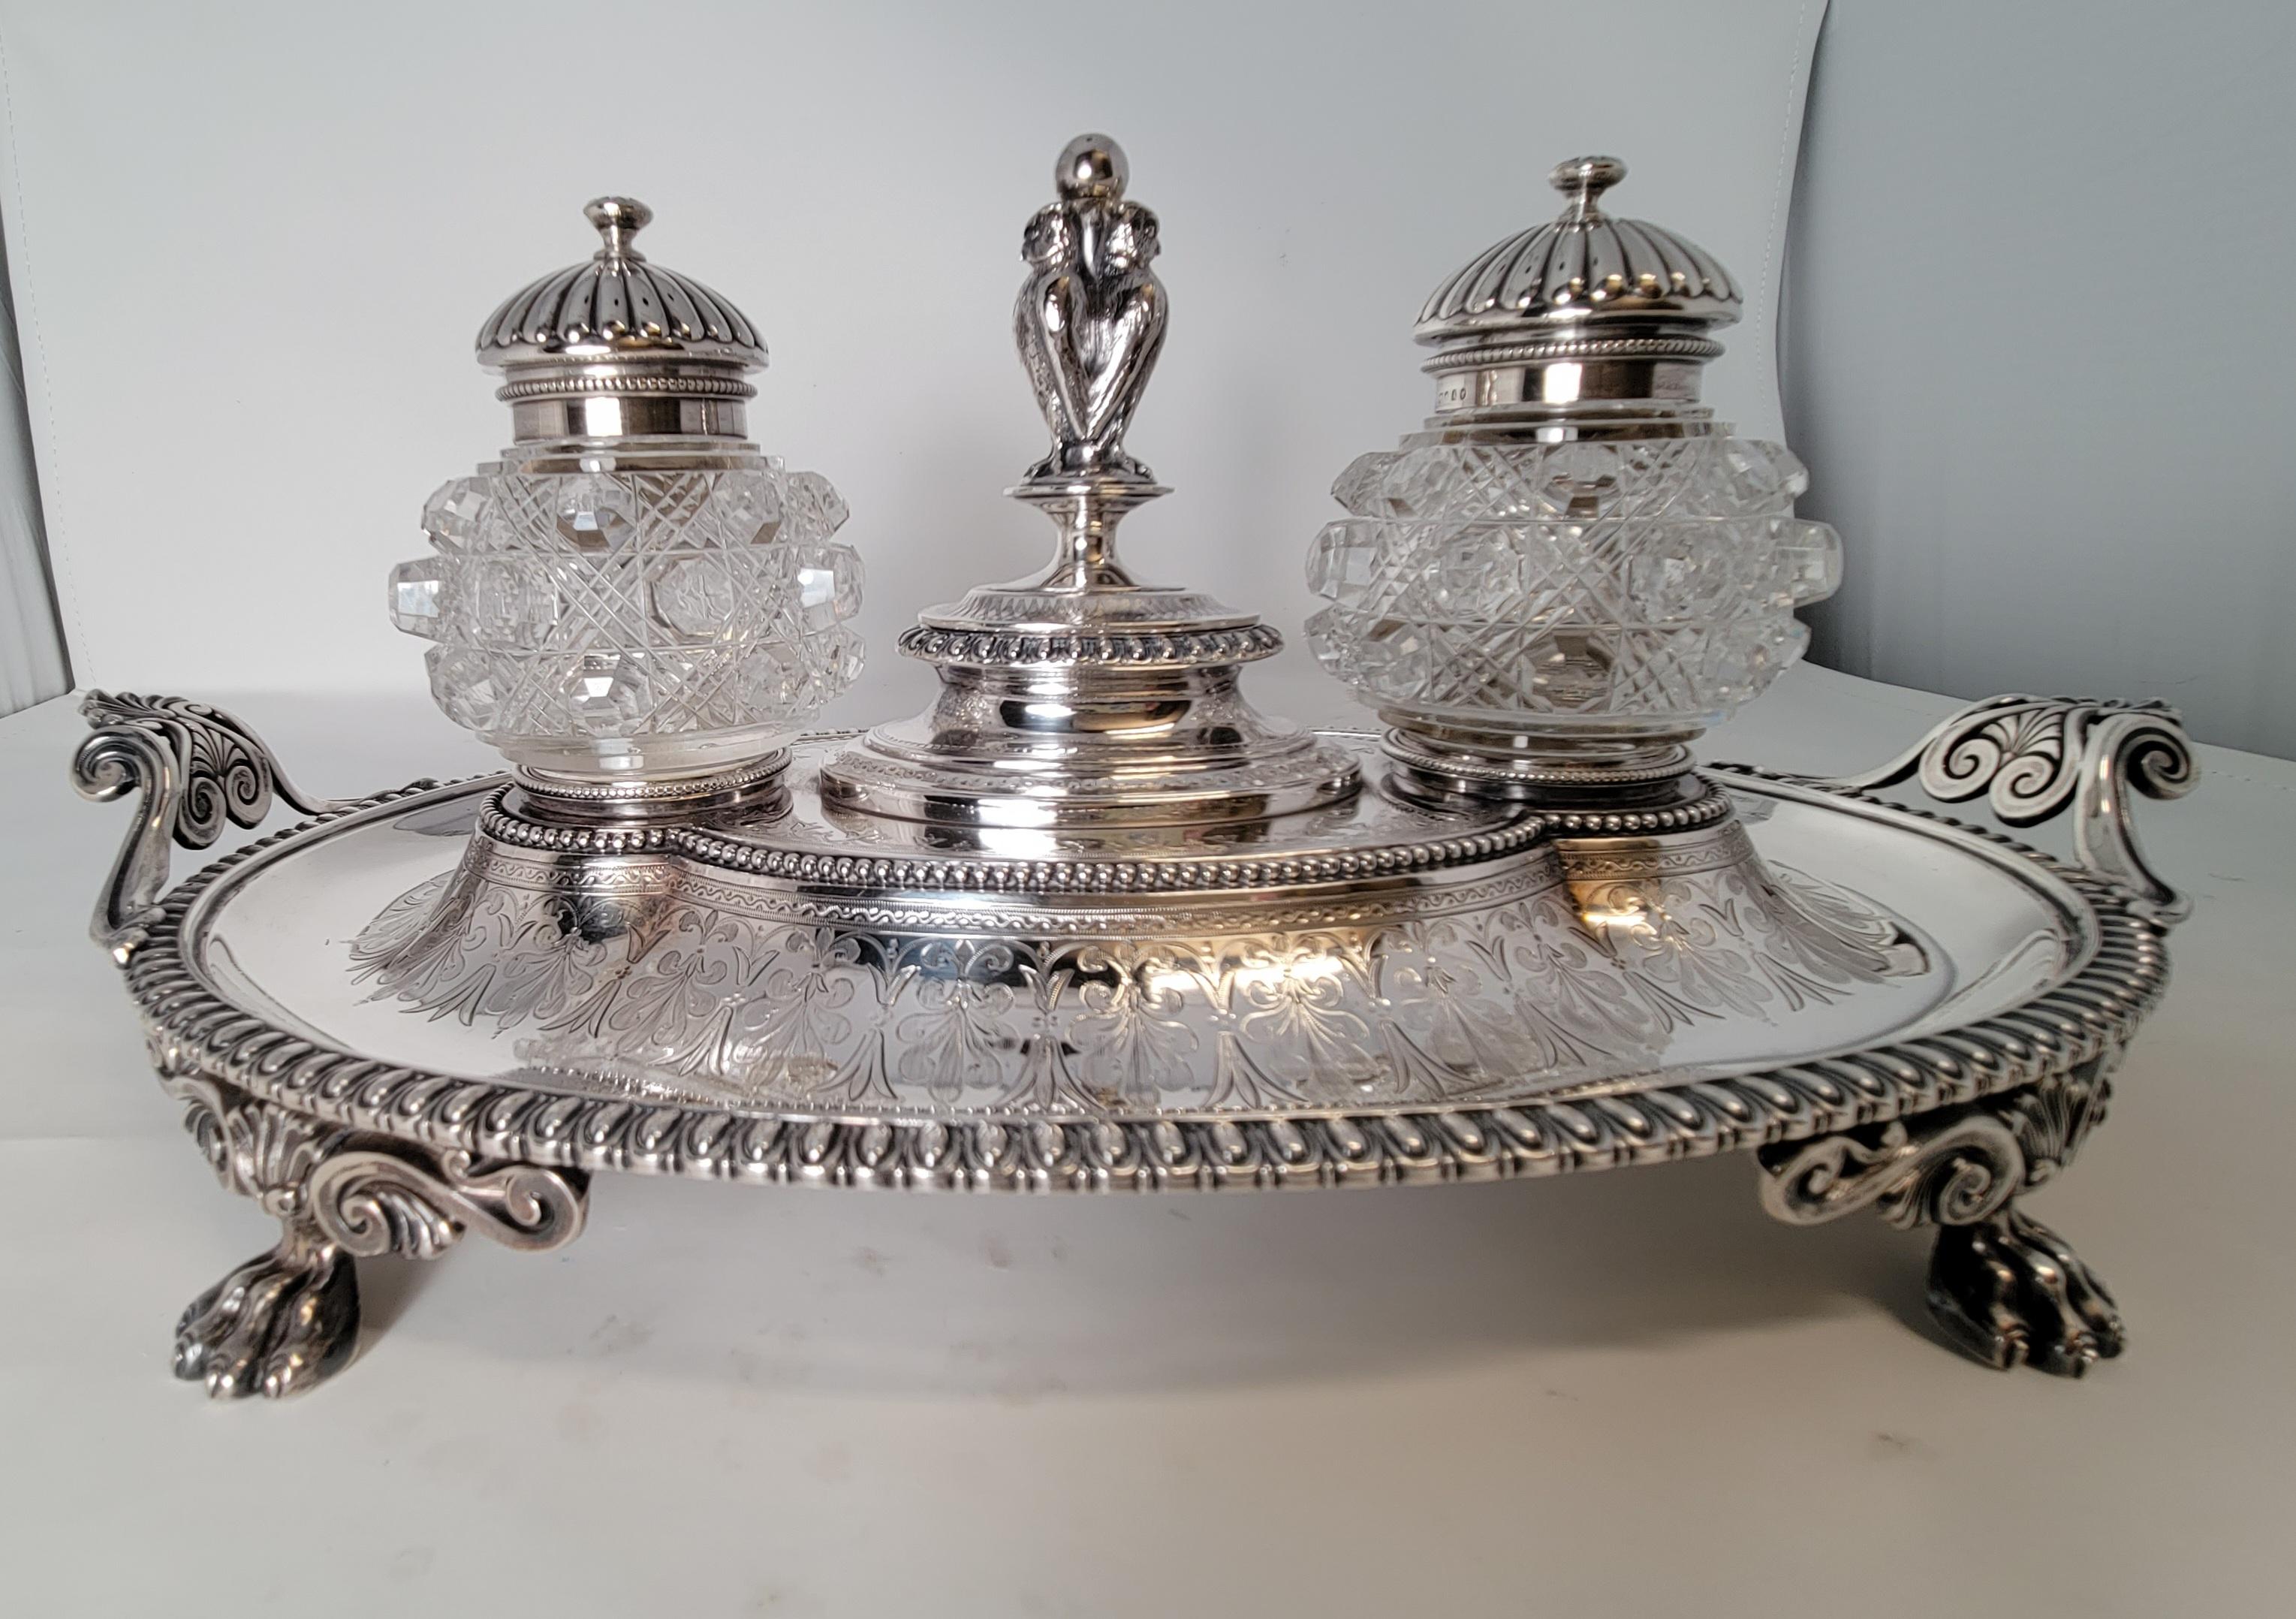 A very handsome double inkwell from the Victorian era.